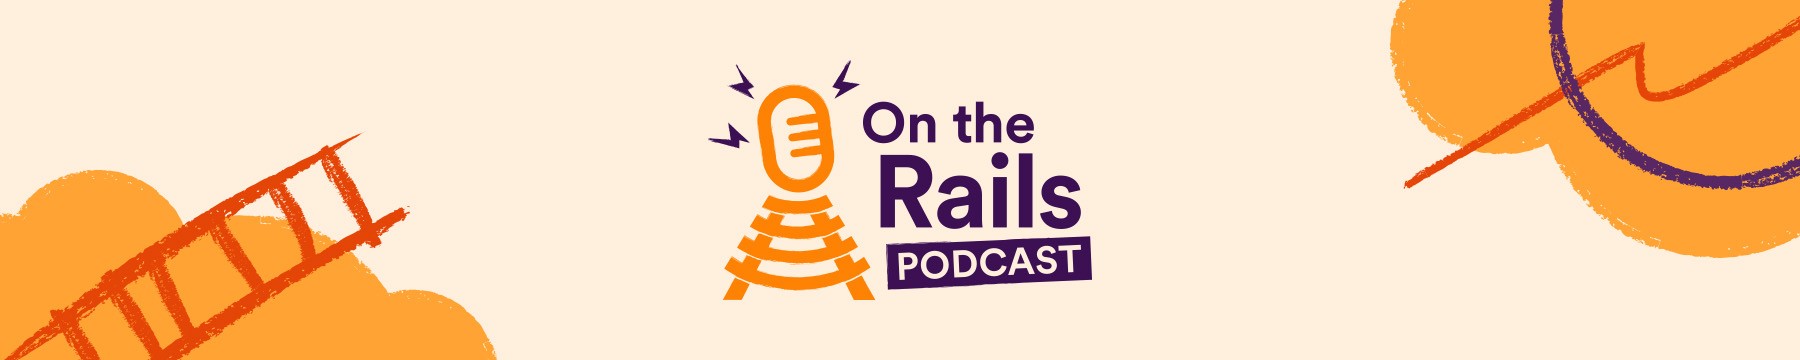 On the Rails podcast banner.